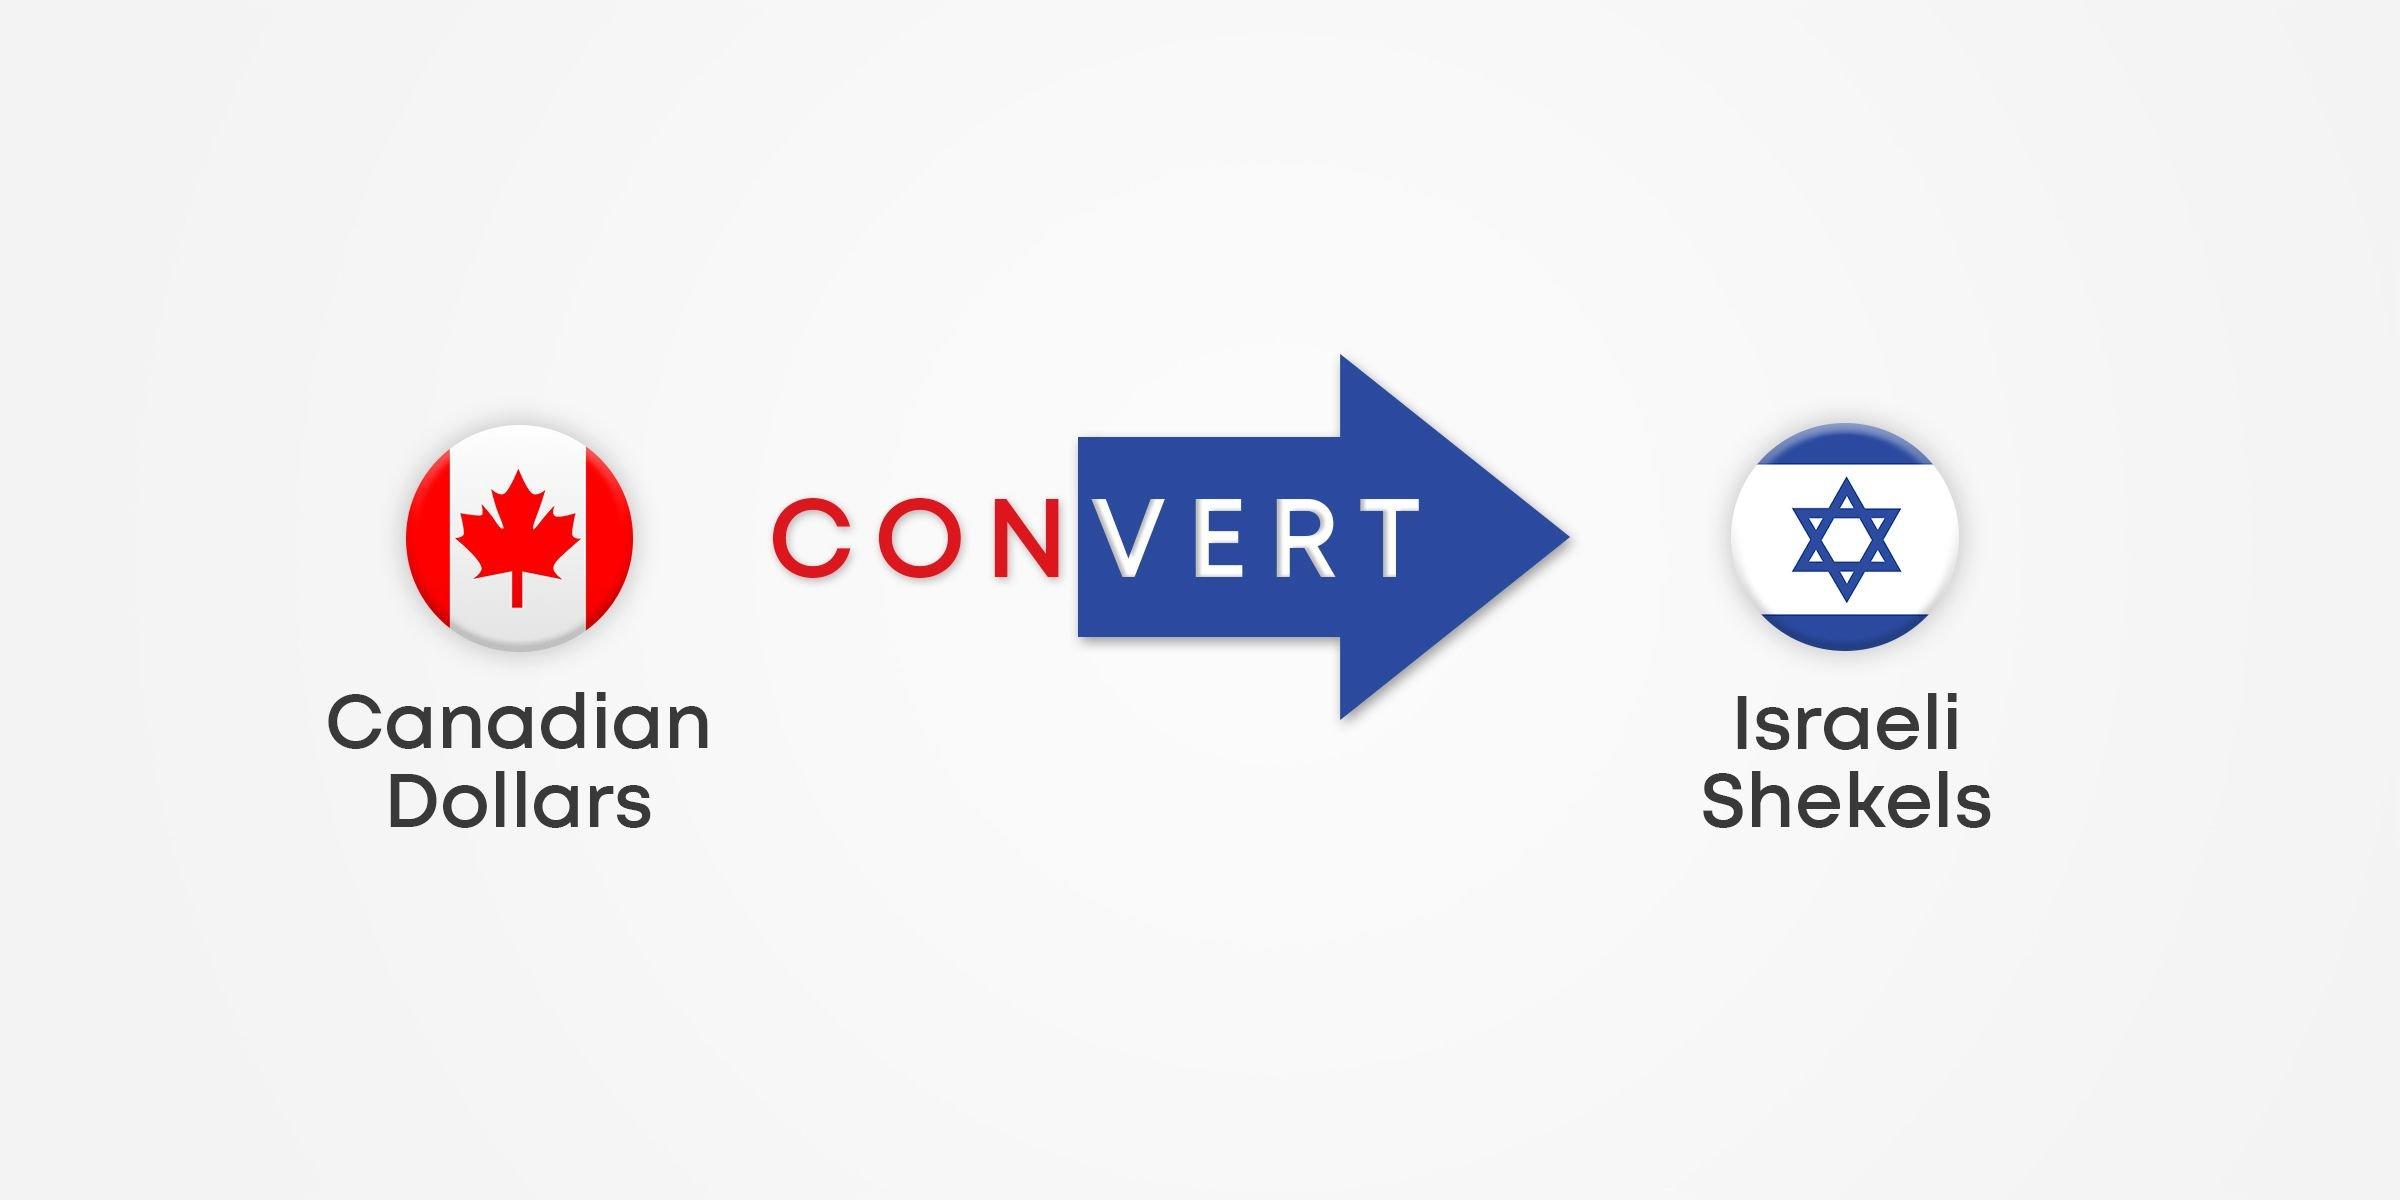 How to Convert Canadian Dollars to Israeli Shekels?